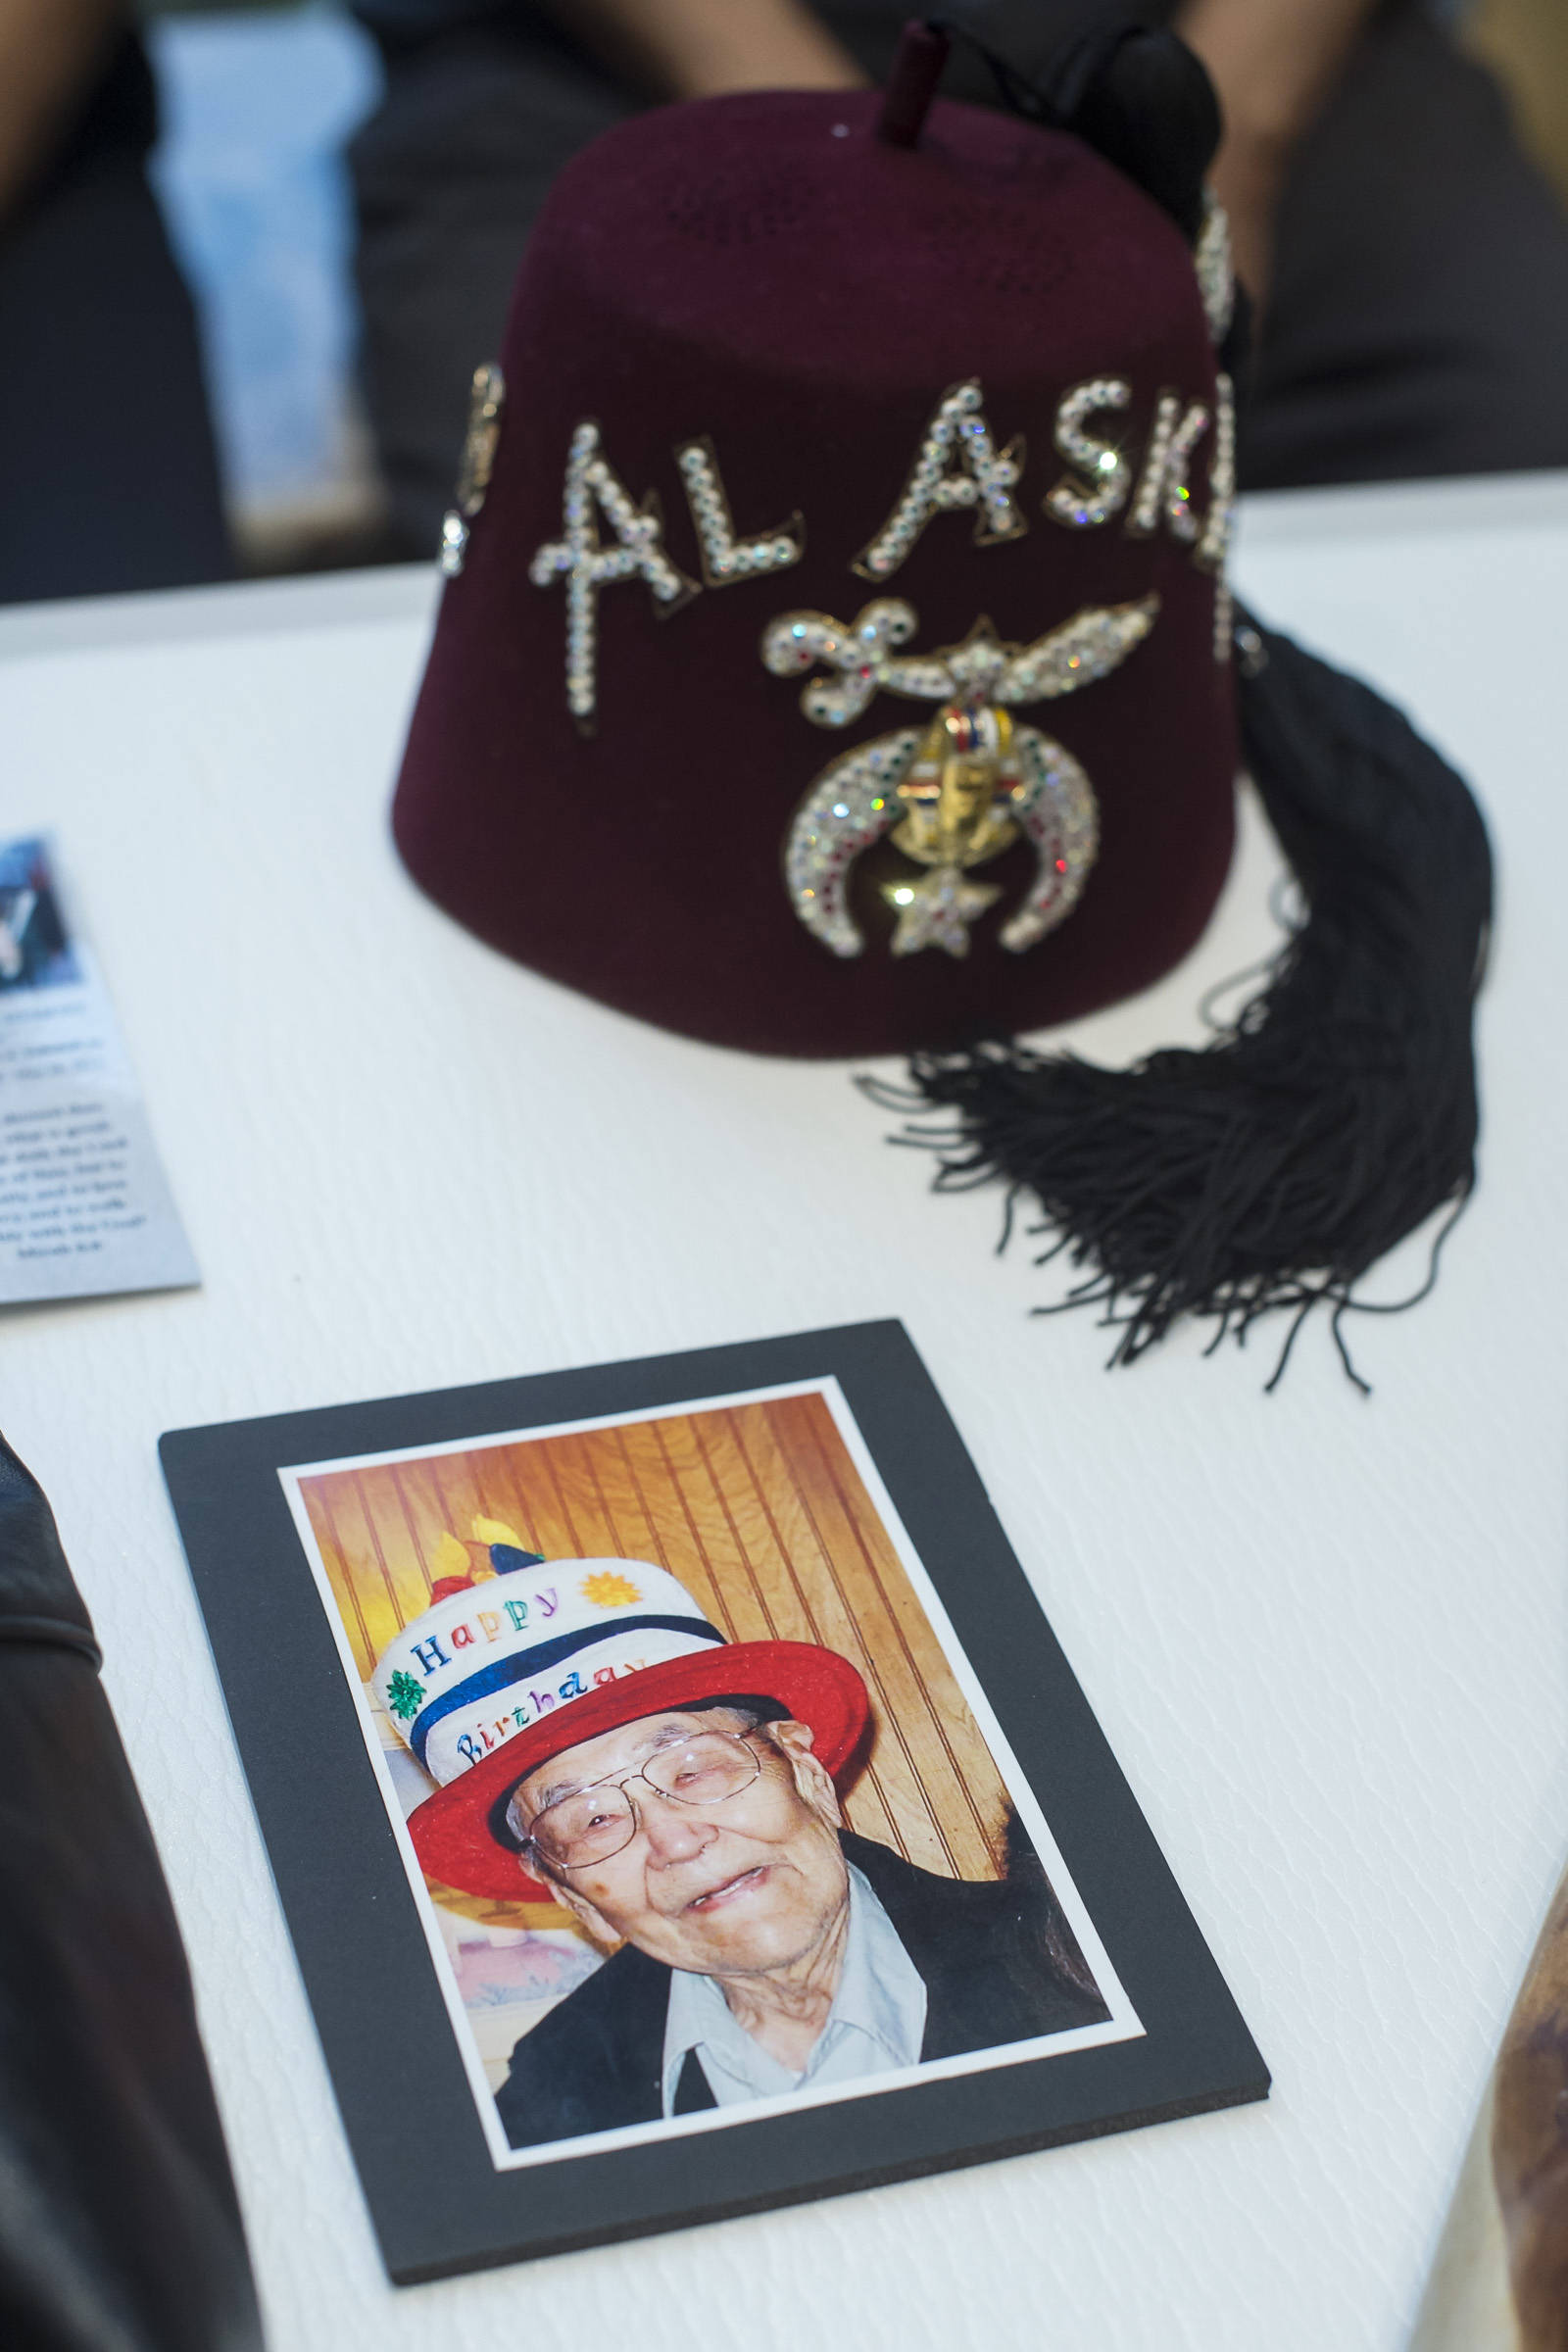 A picture of the Rev. Dr. Walter Soboleff on his 100th Birthday and his hat from the Grand Lodge of Free and Accepted Masons on display at the Walter Soboleff Center on Wednesday, Nov. 14, 2018. Nov. 14 was named Dr. Walter Soboleff Day by the Alaska Legislature in 2014. (Michael Penn | Juneau Empire)